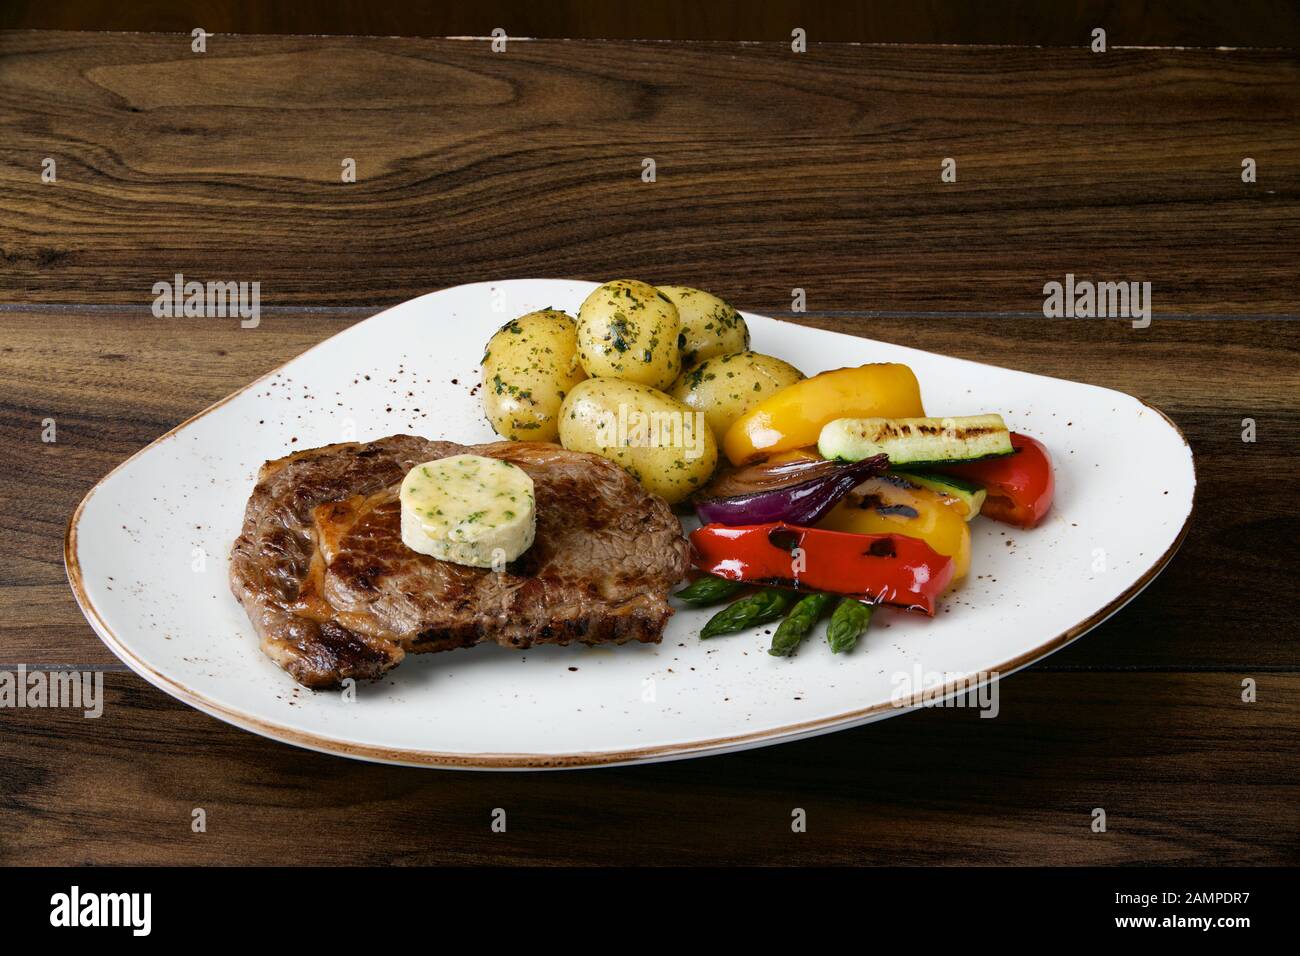 Irish sirloin steak served with baby new potatoes and roasted vegetables. Stock Photo